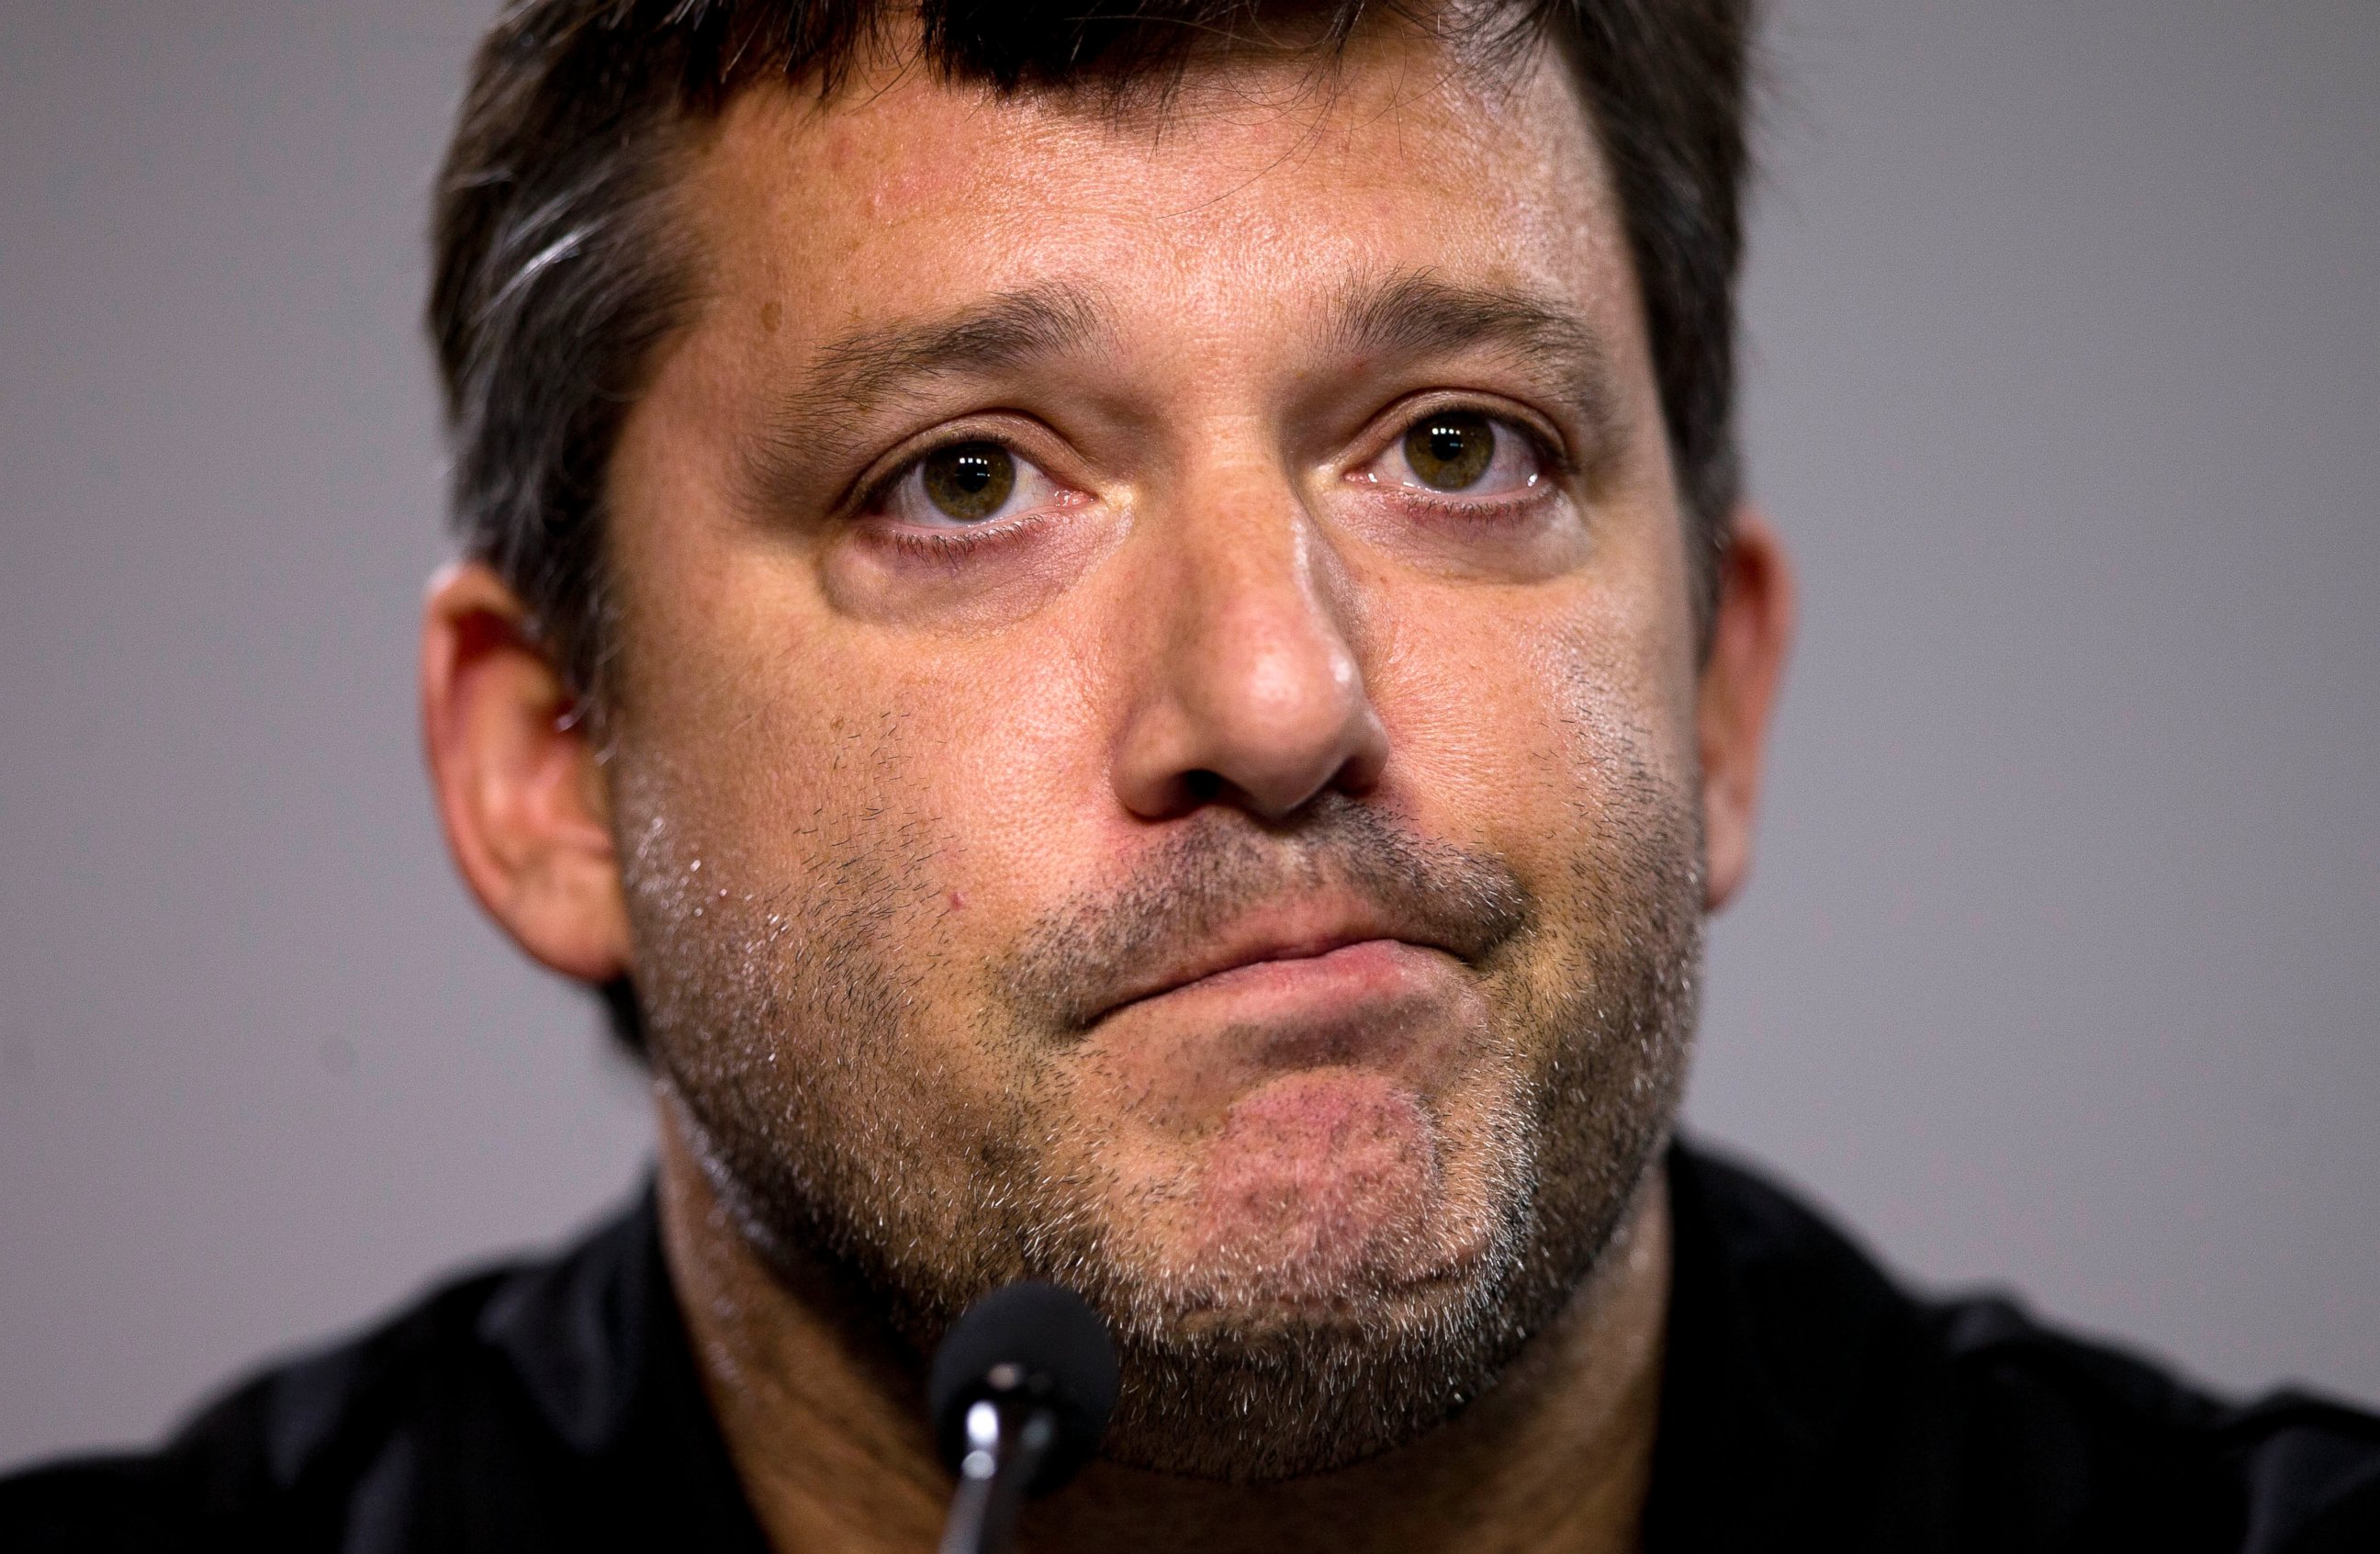 PHOTO: NASCAR auto racing driver Tony Stewart reads a statement during a news conference at Atlanta Motor Speedway in Hampton, Ga., Aug. 29, 2014.